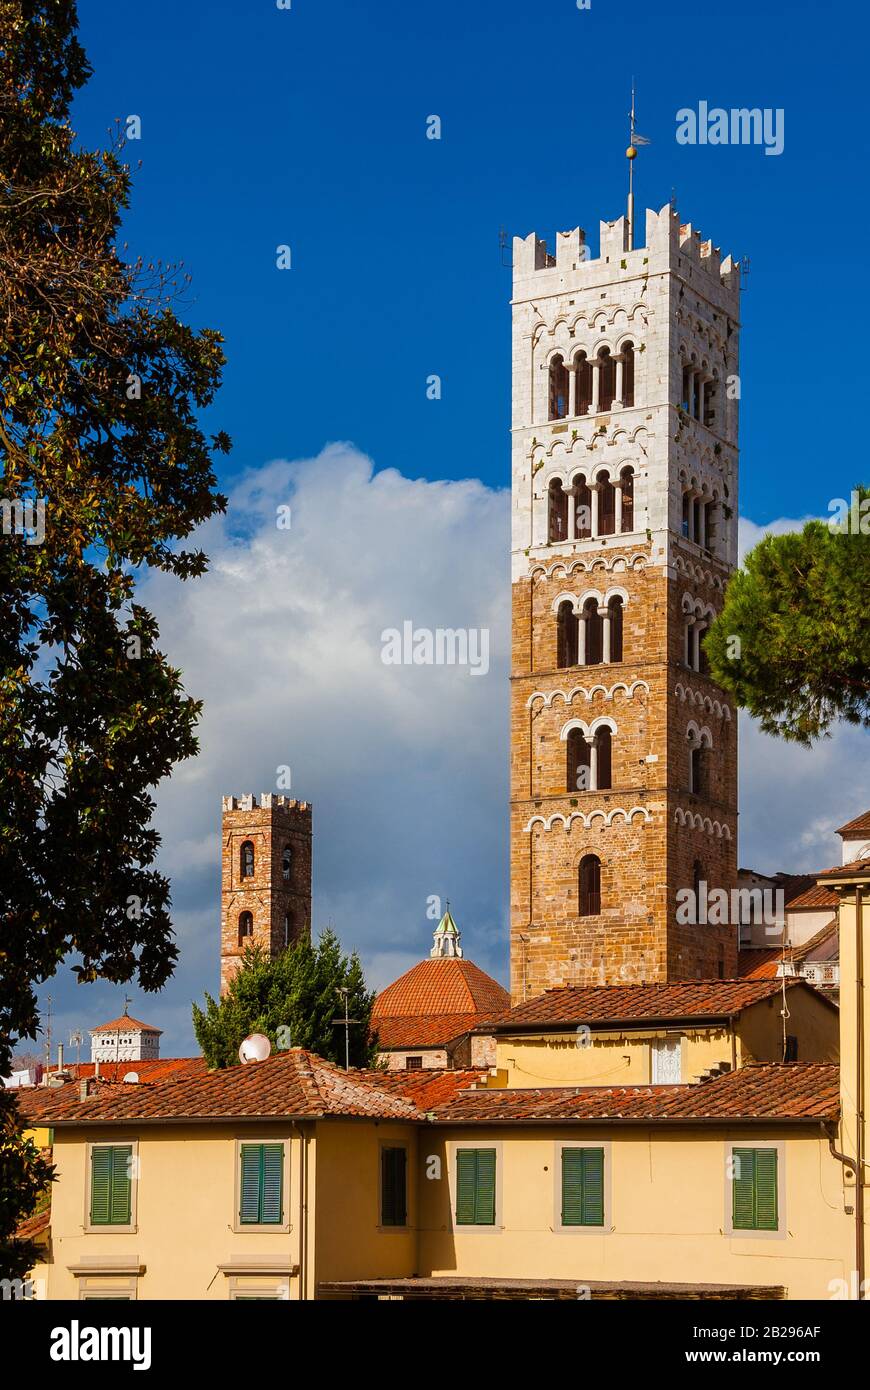 View of Lucca medieval historic center with ancient towers and belfries Stock Photo